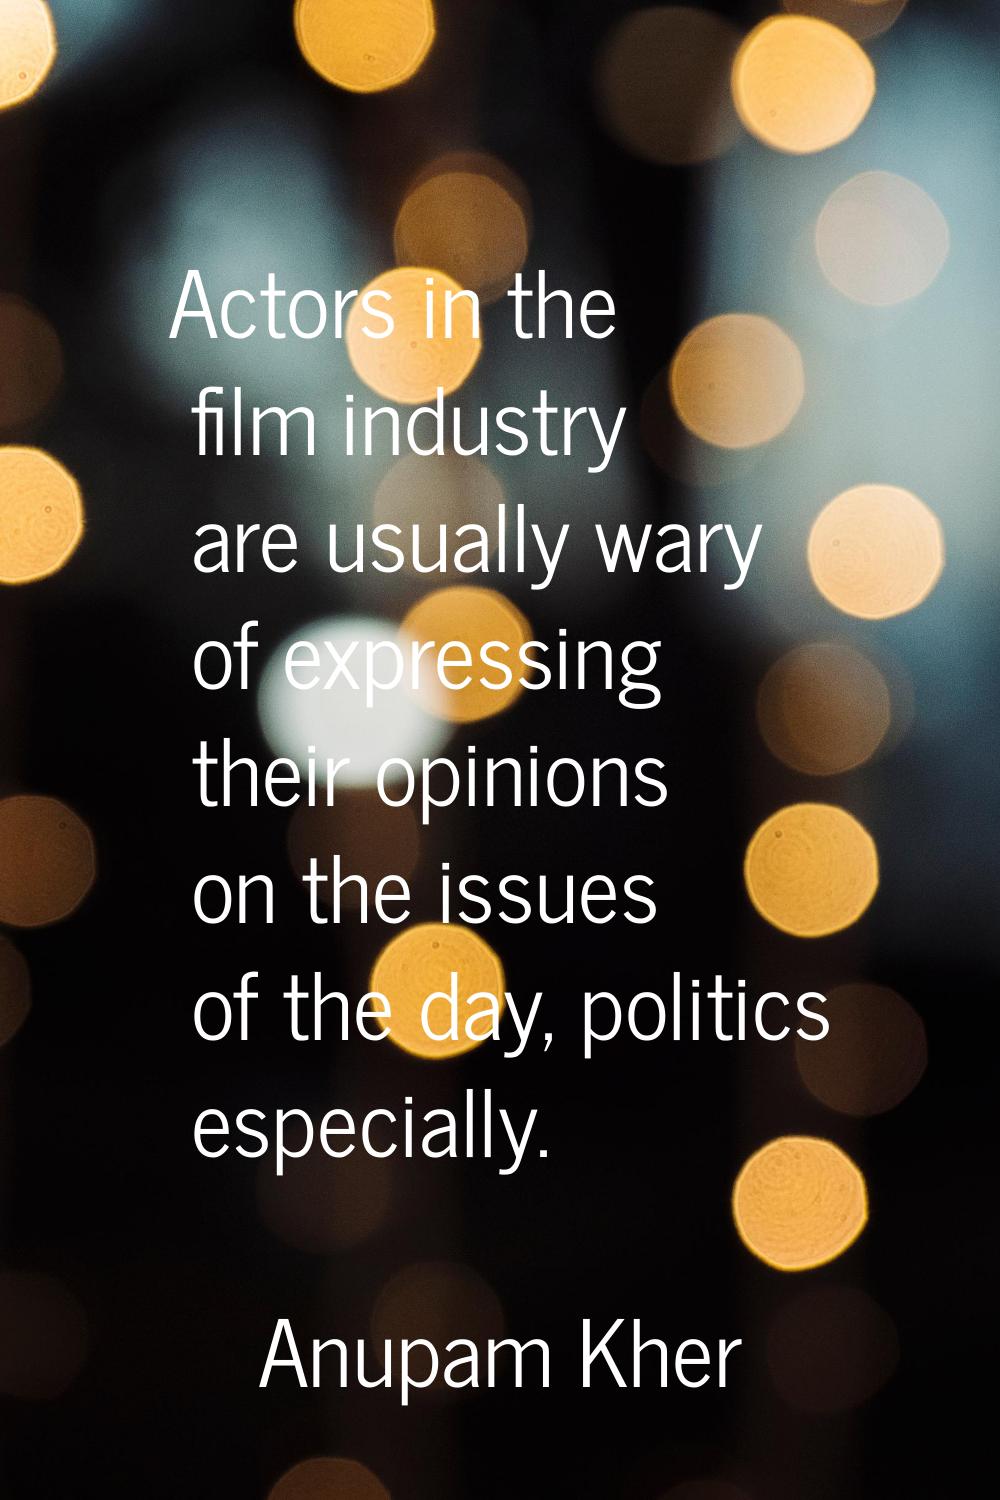 Actors in the film industry are usually wary of expressing their opinions on the issues of the day,